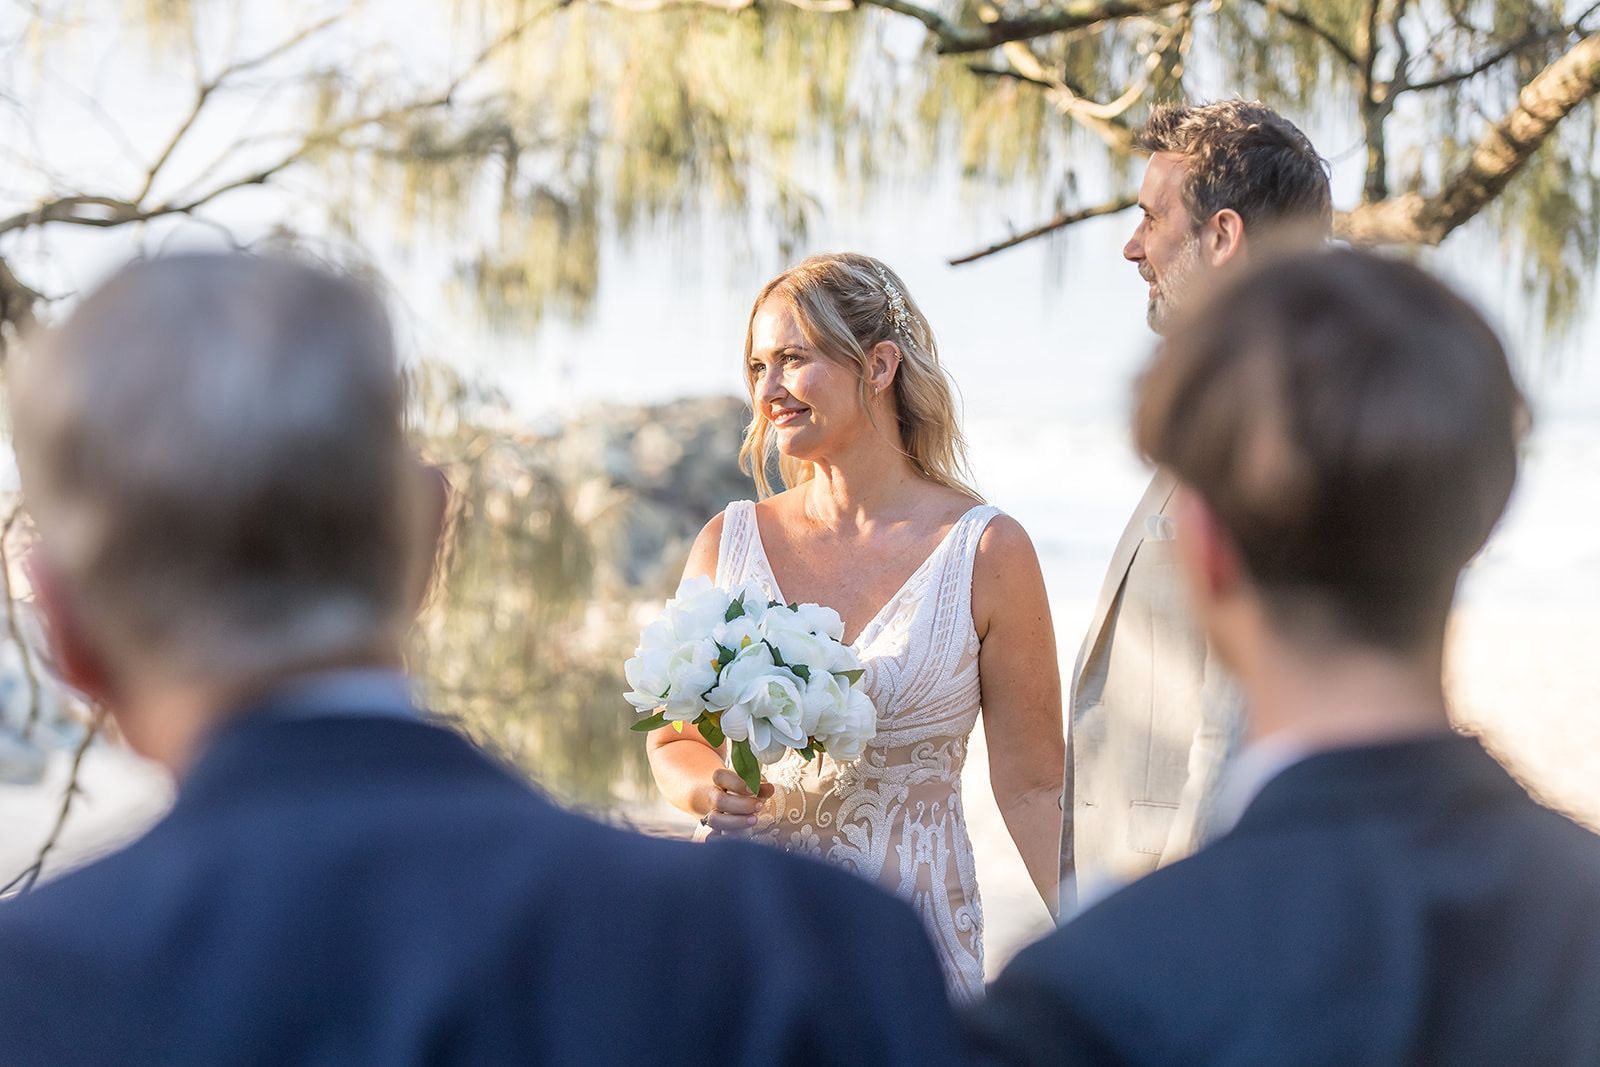 Sunset ceremony packages Noosa Rock wall Noosa Wedding Celebrant